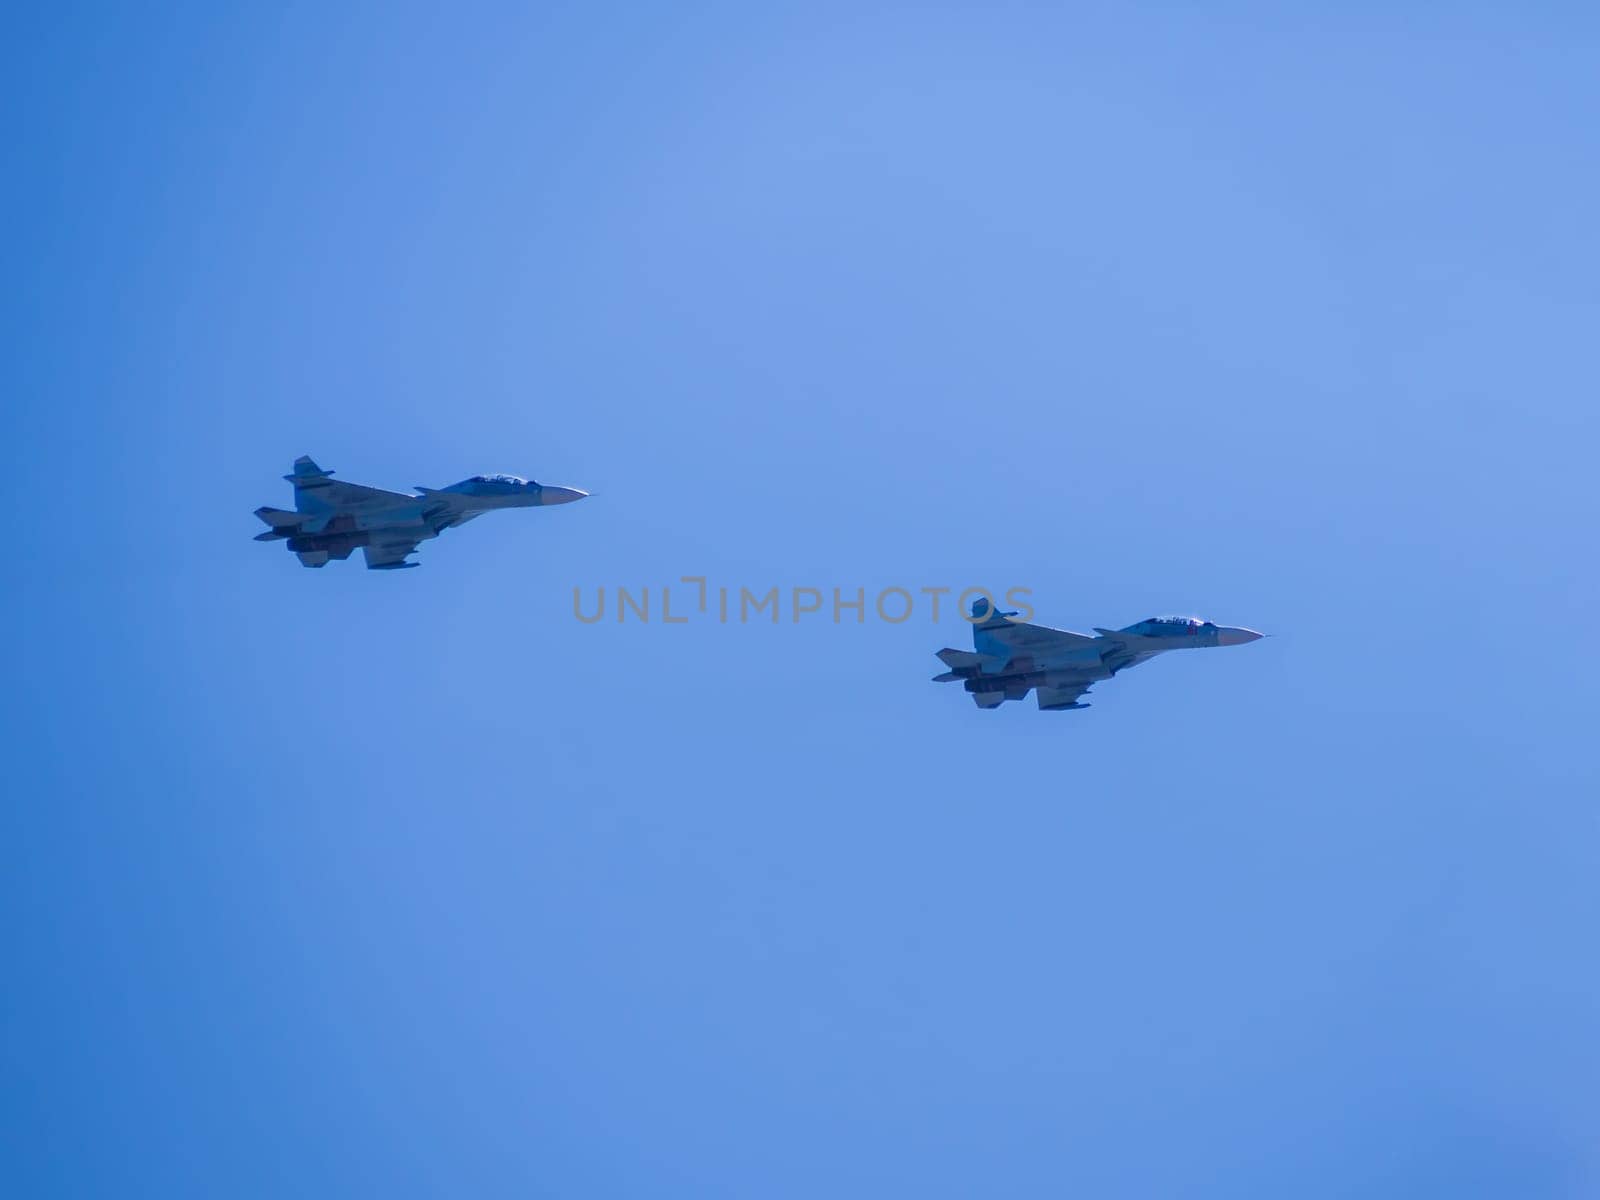 Russia, St. Petersburg - June 24, 2020: Demonstration flight of two Russian-made su-30SM multirole fighters. Russian military su-30SM plane of the Russian Air Force in flight at the Victory Parade in World War II.